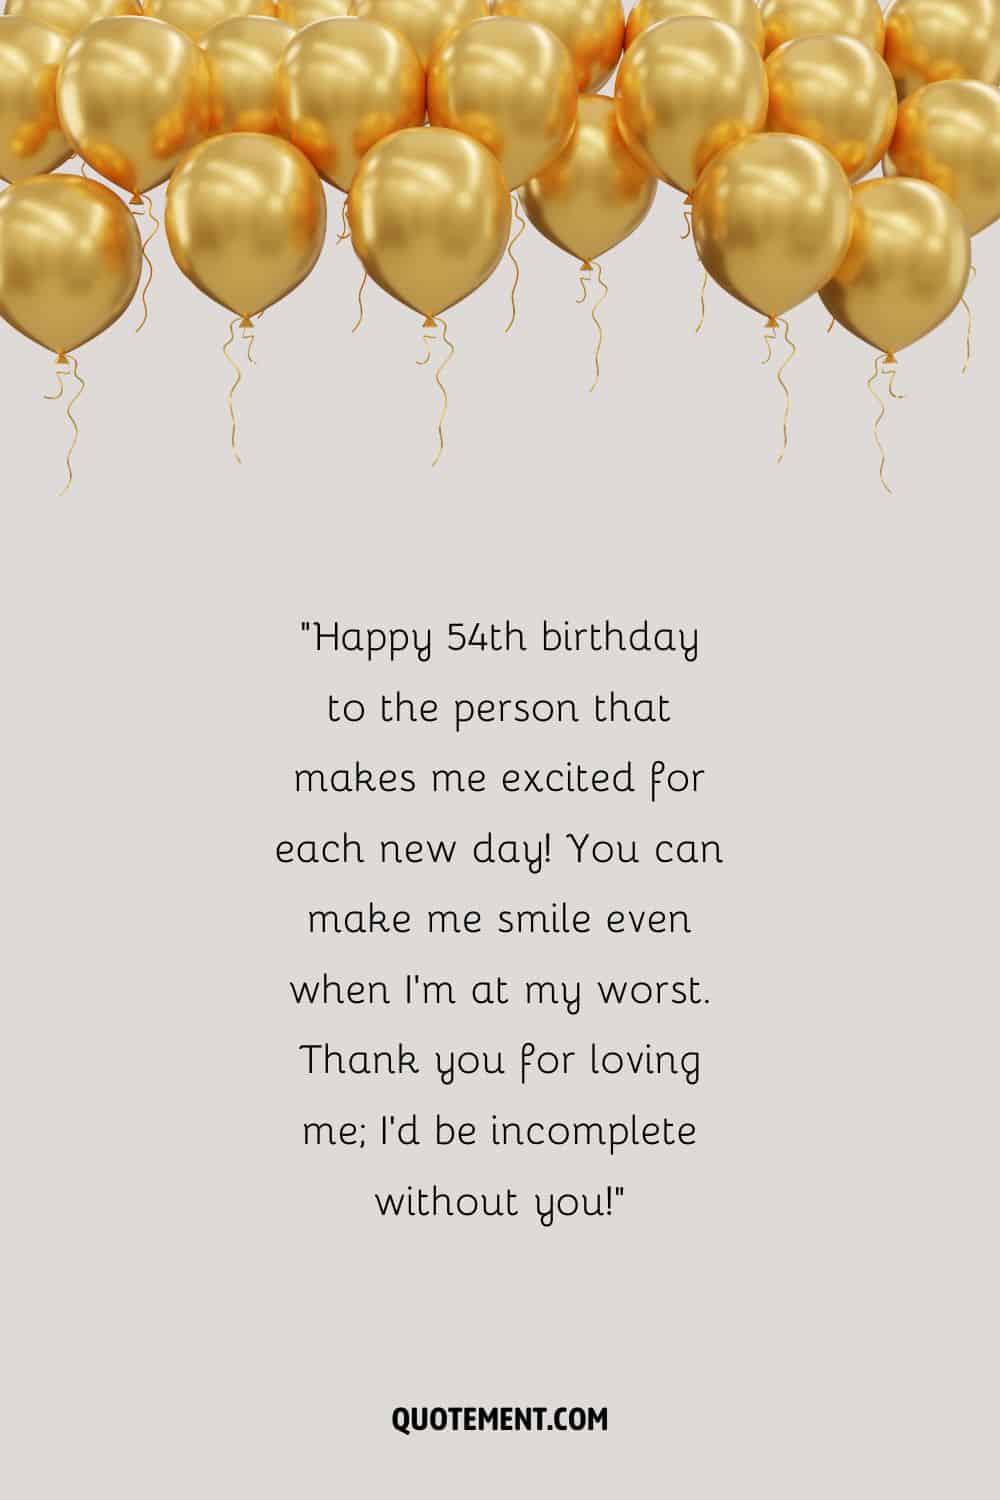 Best happy 54th birthday message and loads of golden balloons above.
